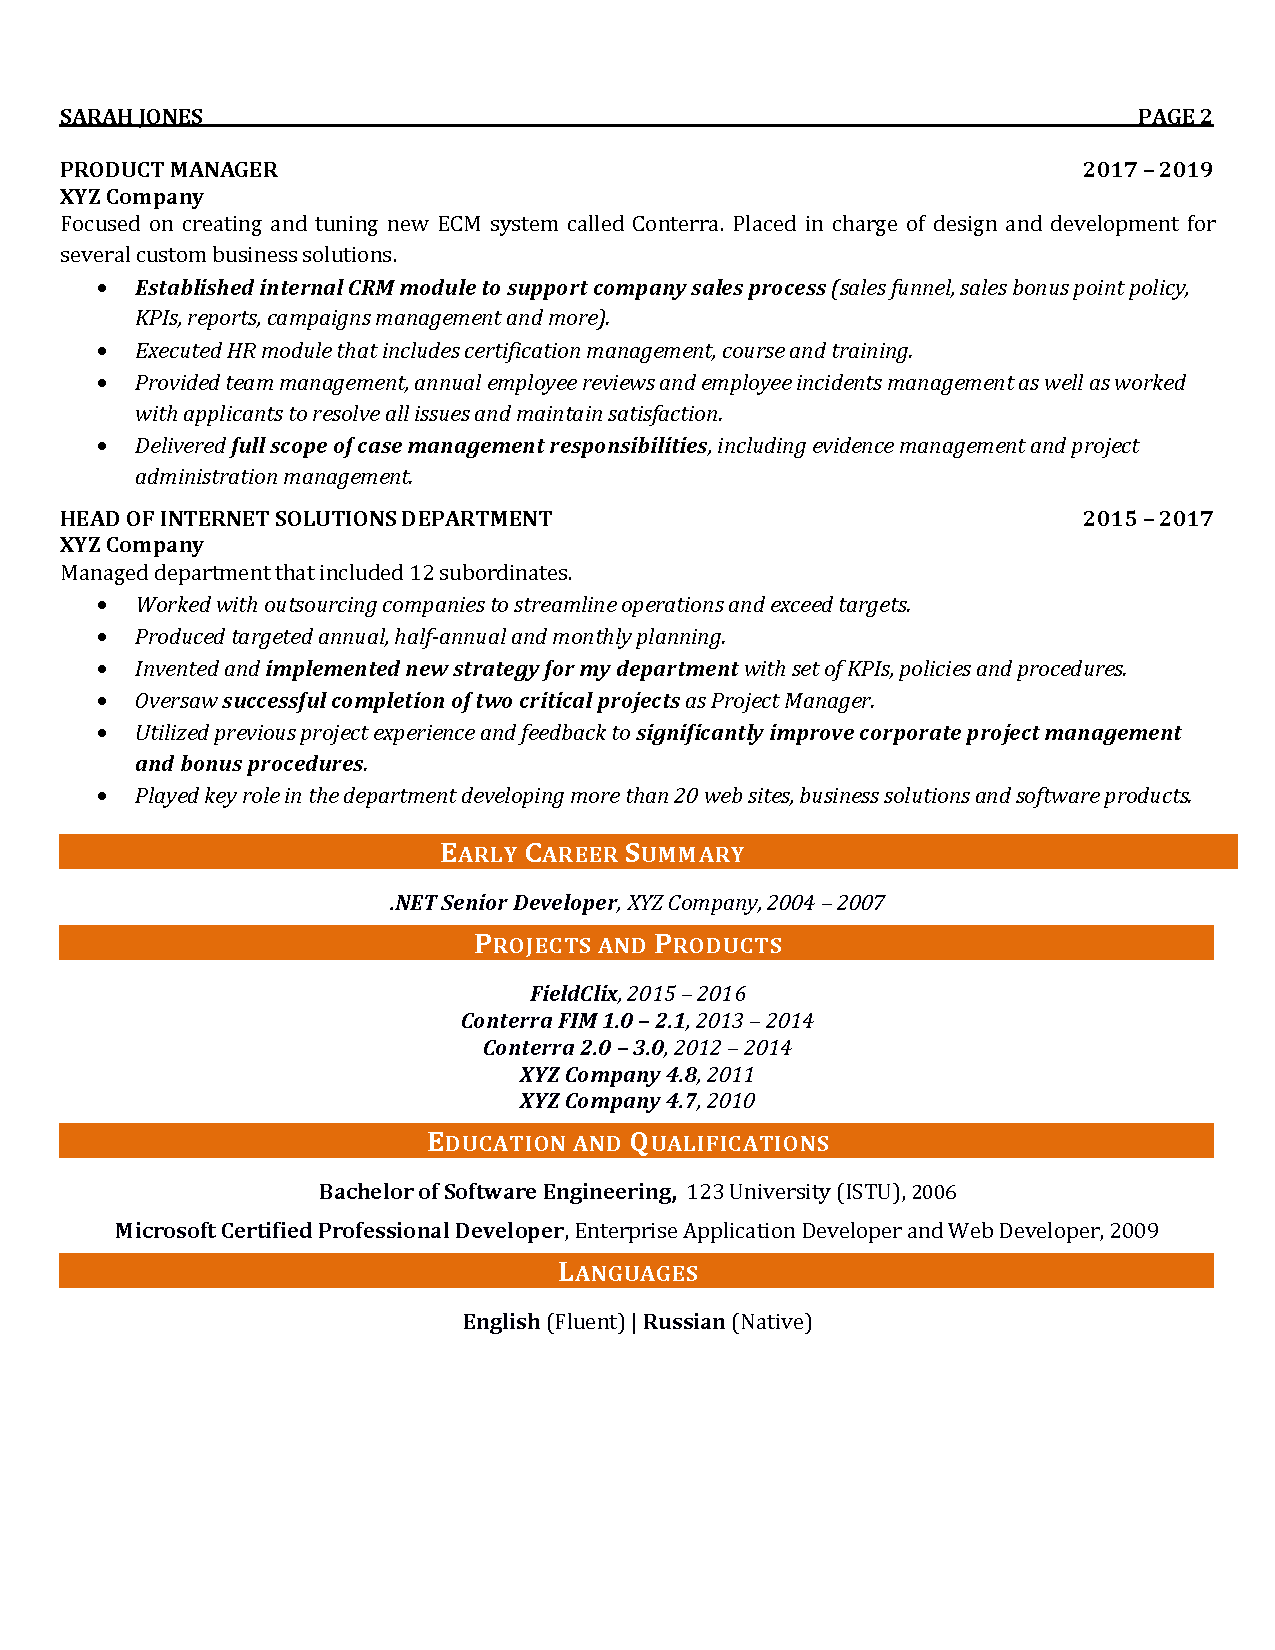 00008 software product manager resume example Page 2